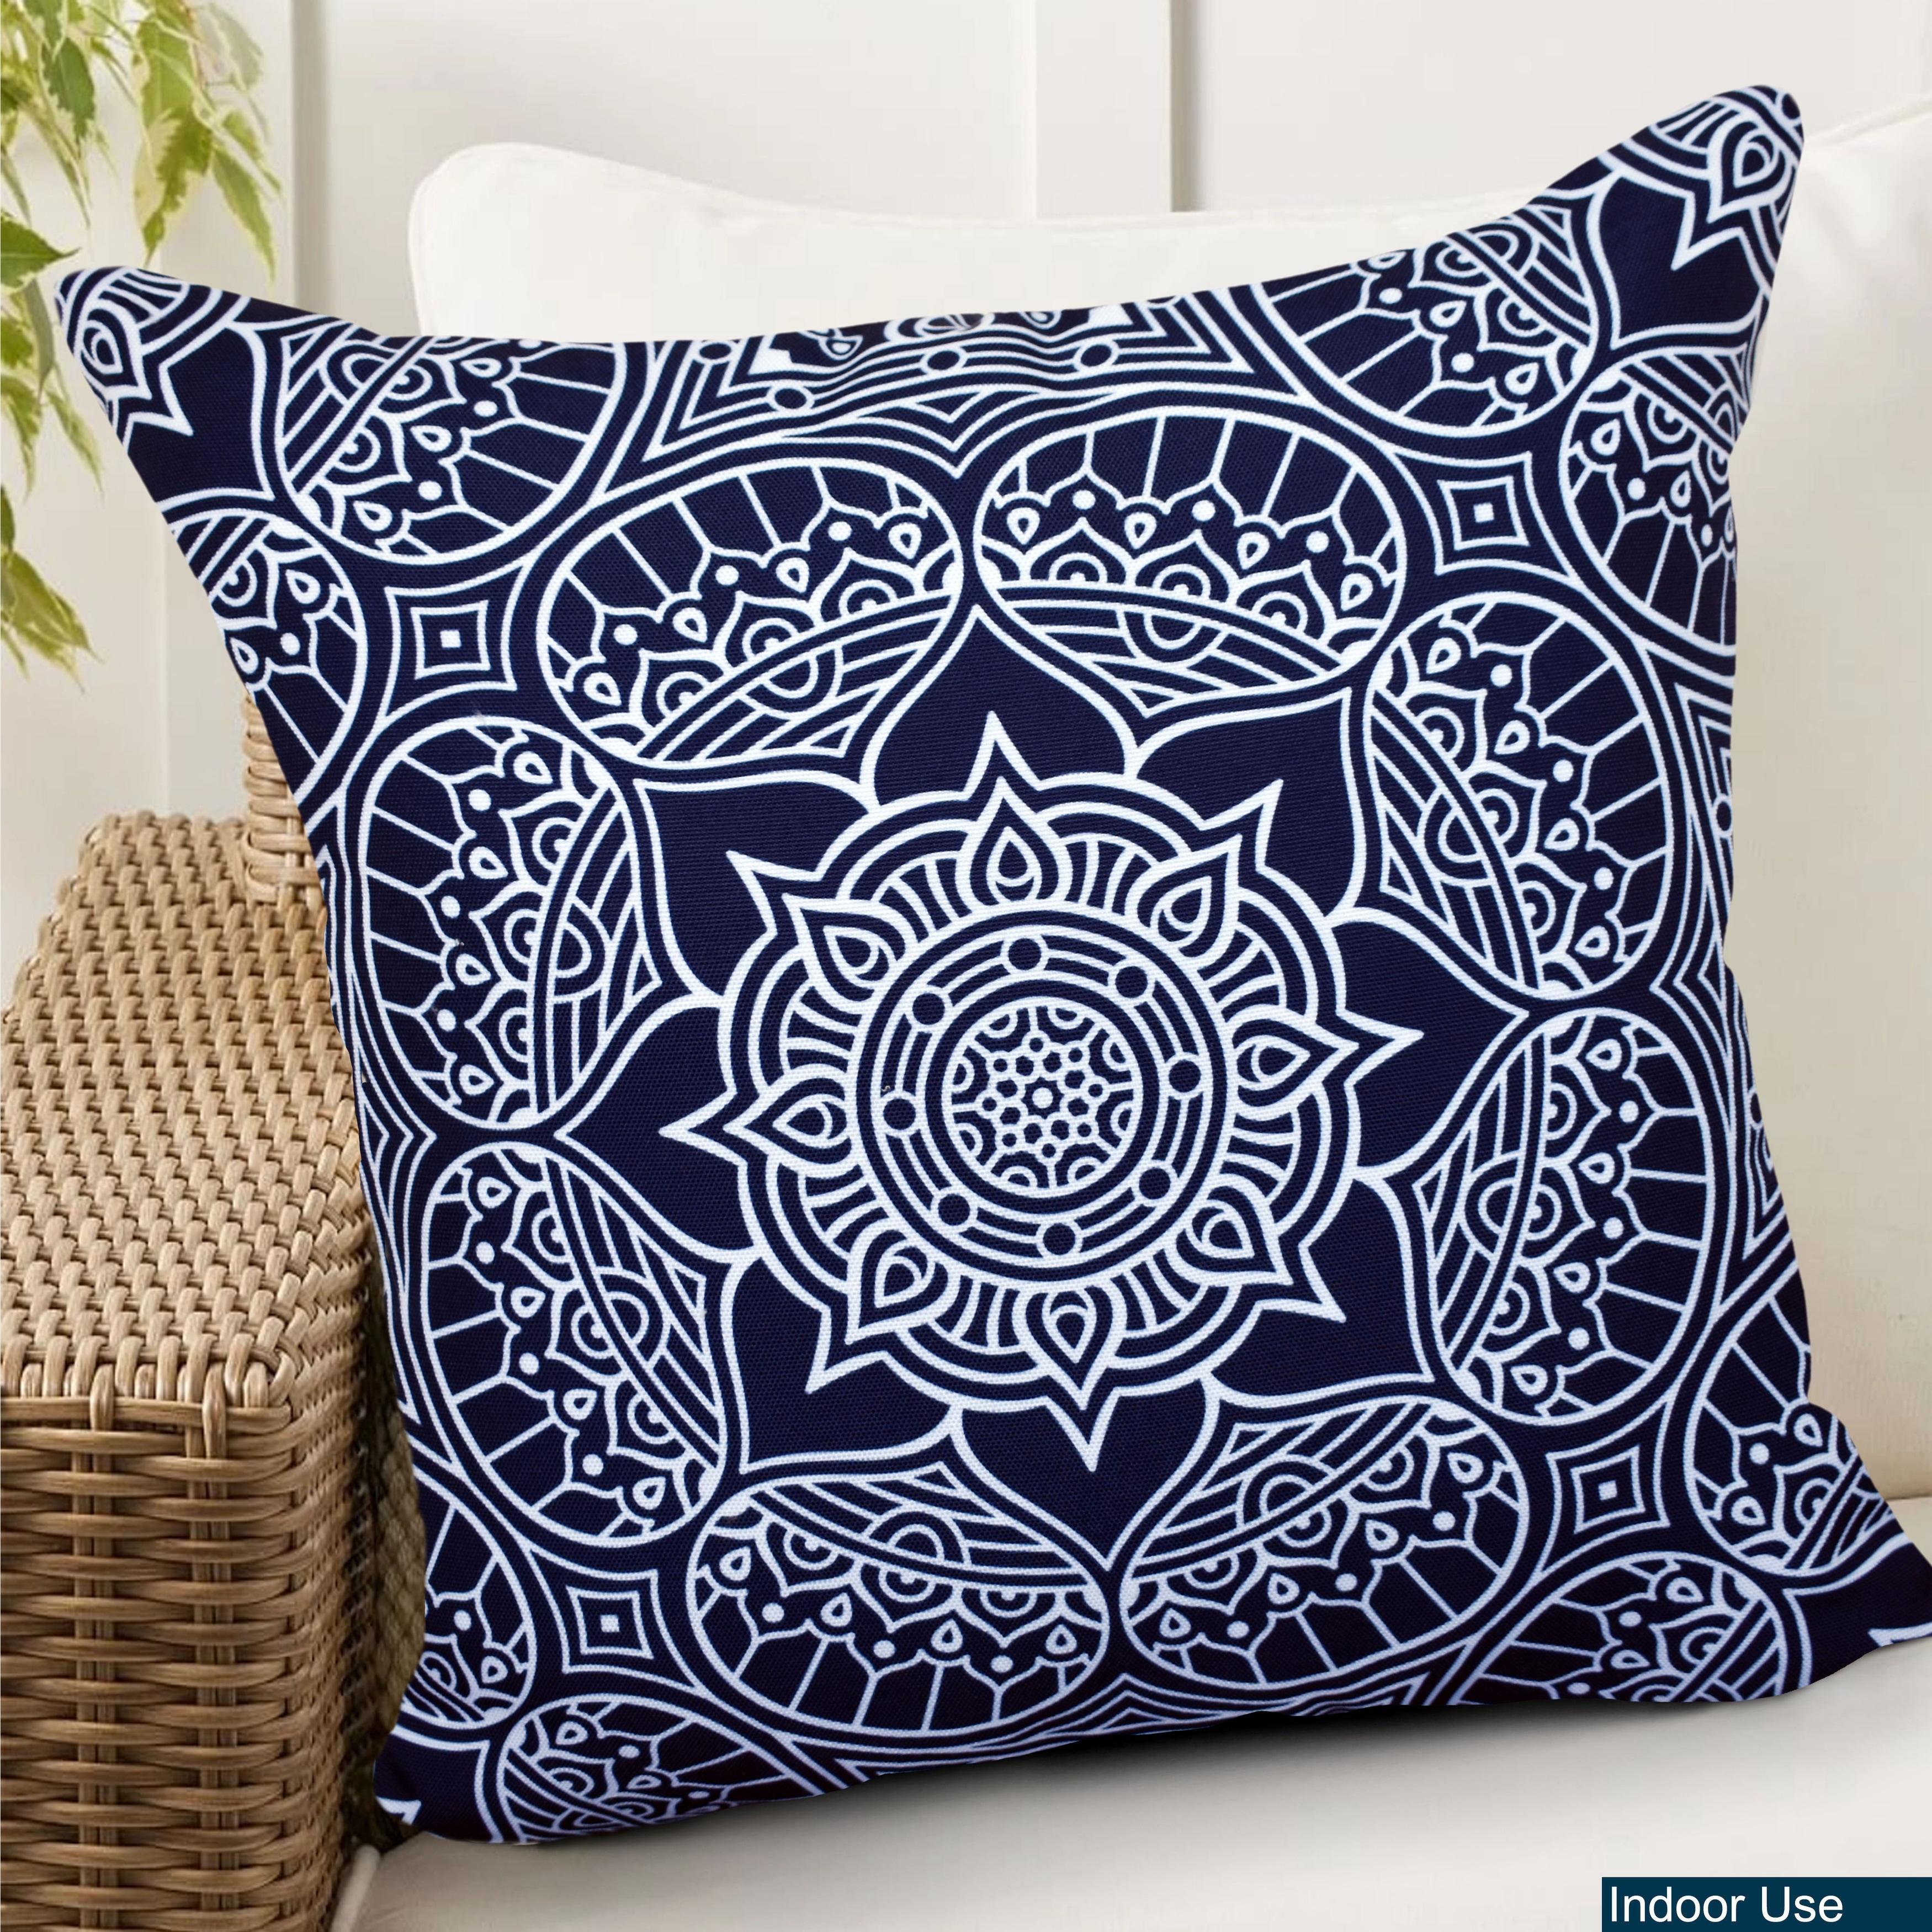 https://ak1.ostkcdn.com/images/products/is/images/direct/9ab19e7f9c04dfe514a7e377c8576c3dd475cfff/DecorativeIndoor-Outdoor-Waterproof-Throw-Pillows-18x18-Inches-with-Inserts-for-Your-Patio-Furniture%2C-Chairs%2C-Indoor-D%C3%A9cor.jpg